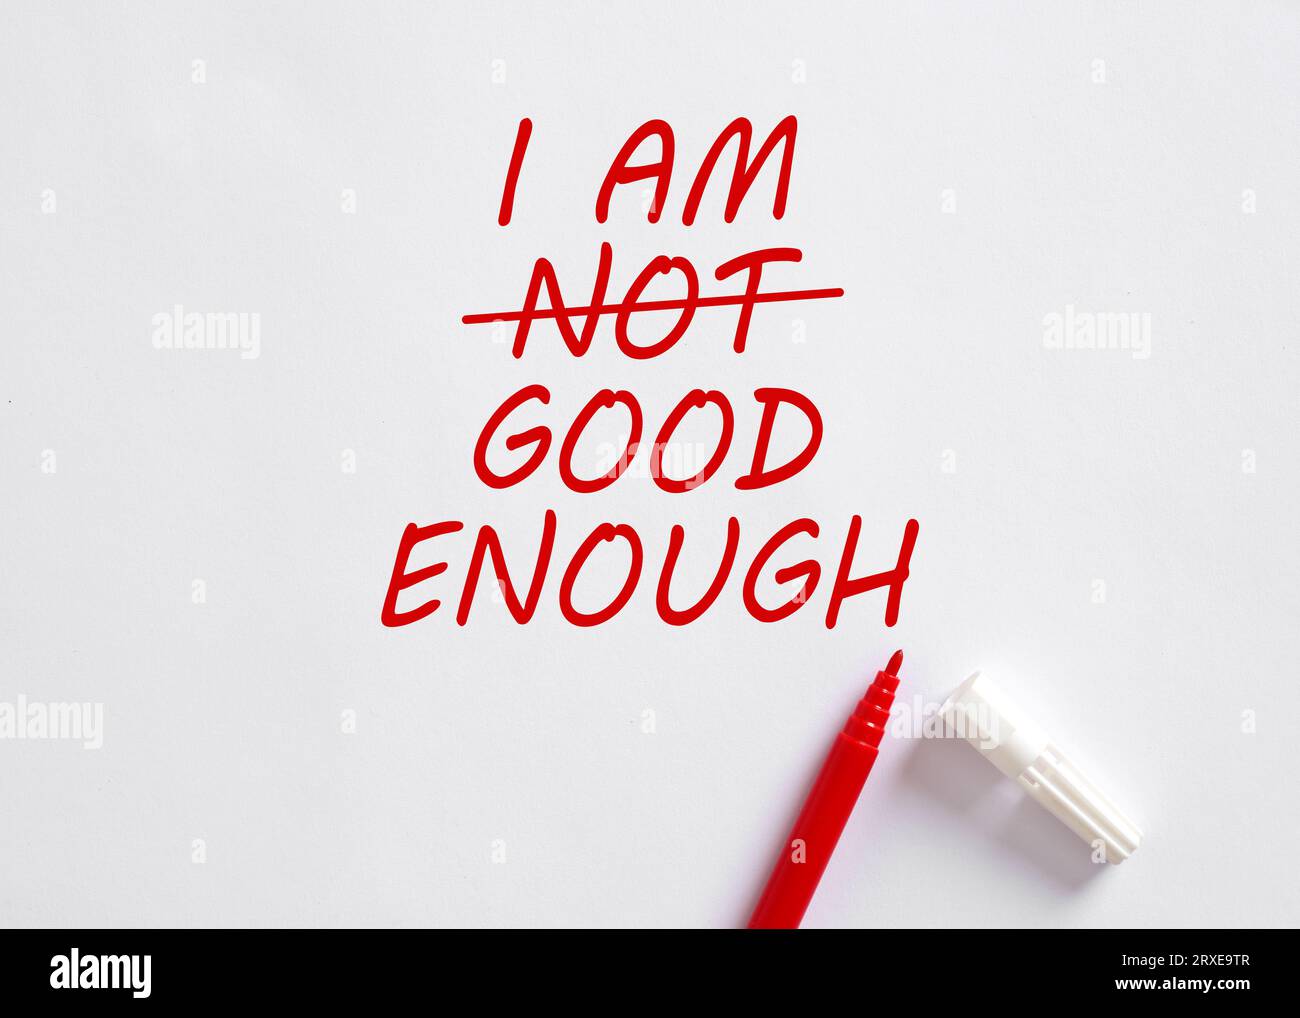 I AM NOT GOOD ENOUGH changed to I AM GOOD ENOUGH. Building self esteem ...